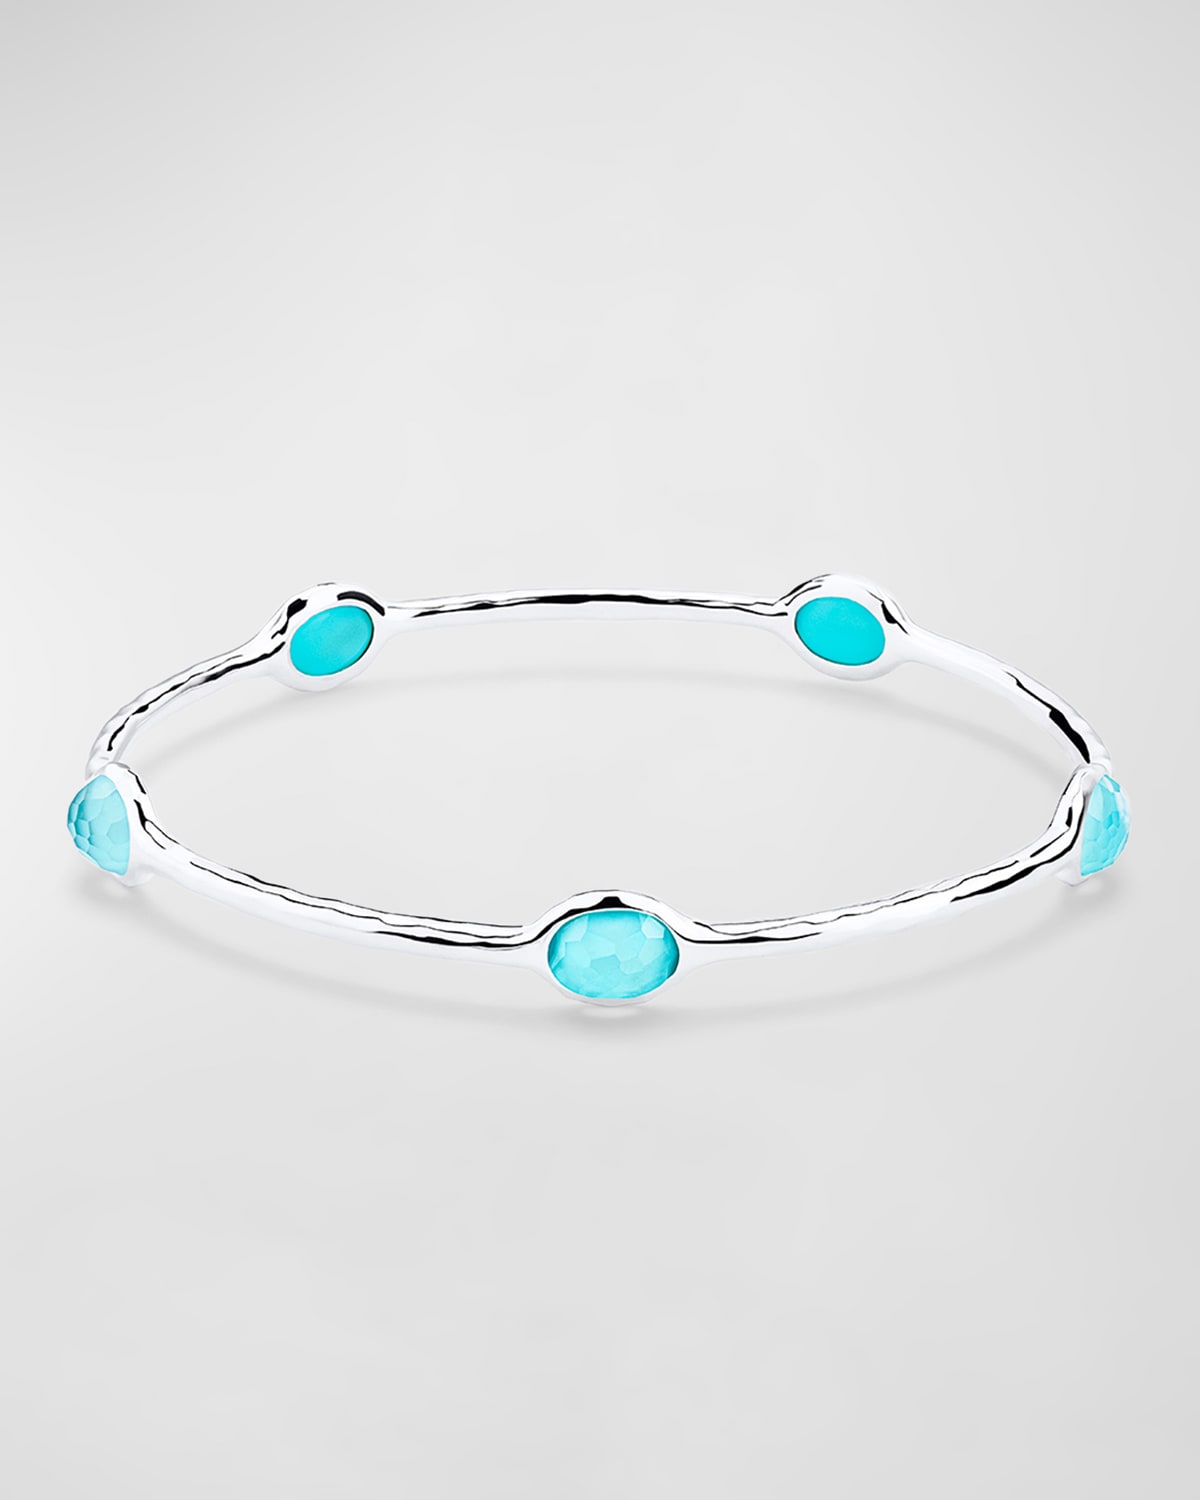 IPPOLITA ROCK CANDY 5-STONE BANGLE BRACELET IN TURQUOISE DOUBLET